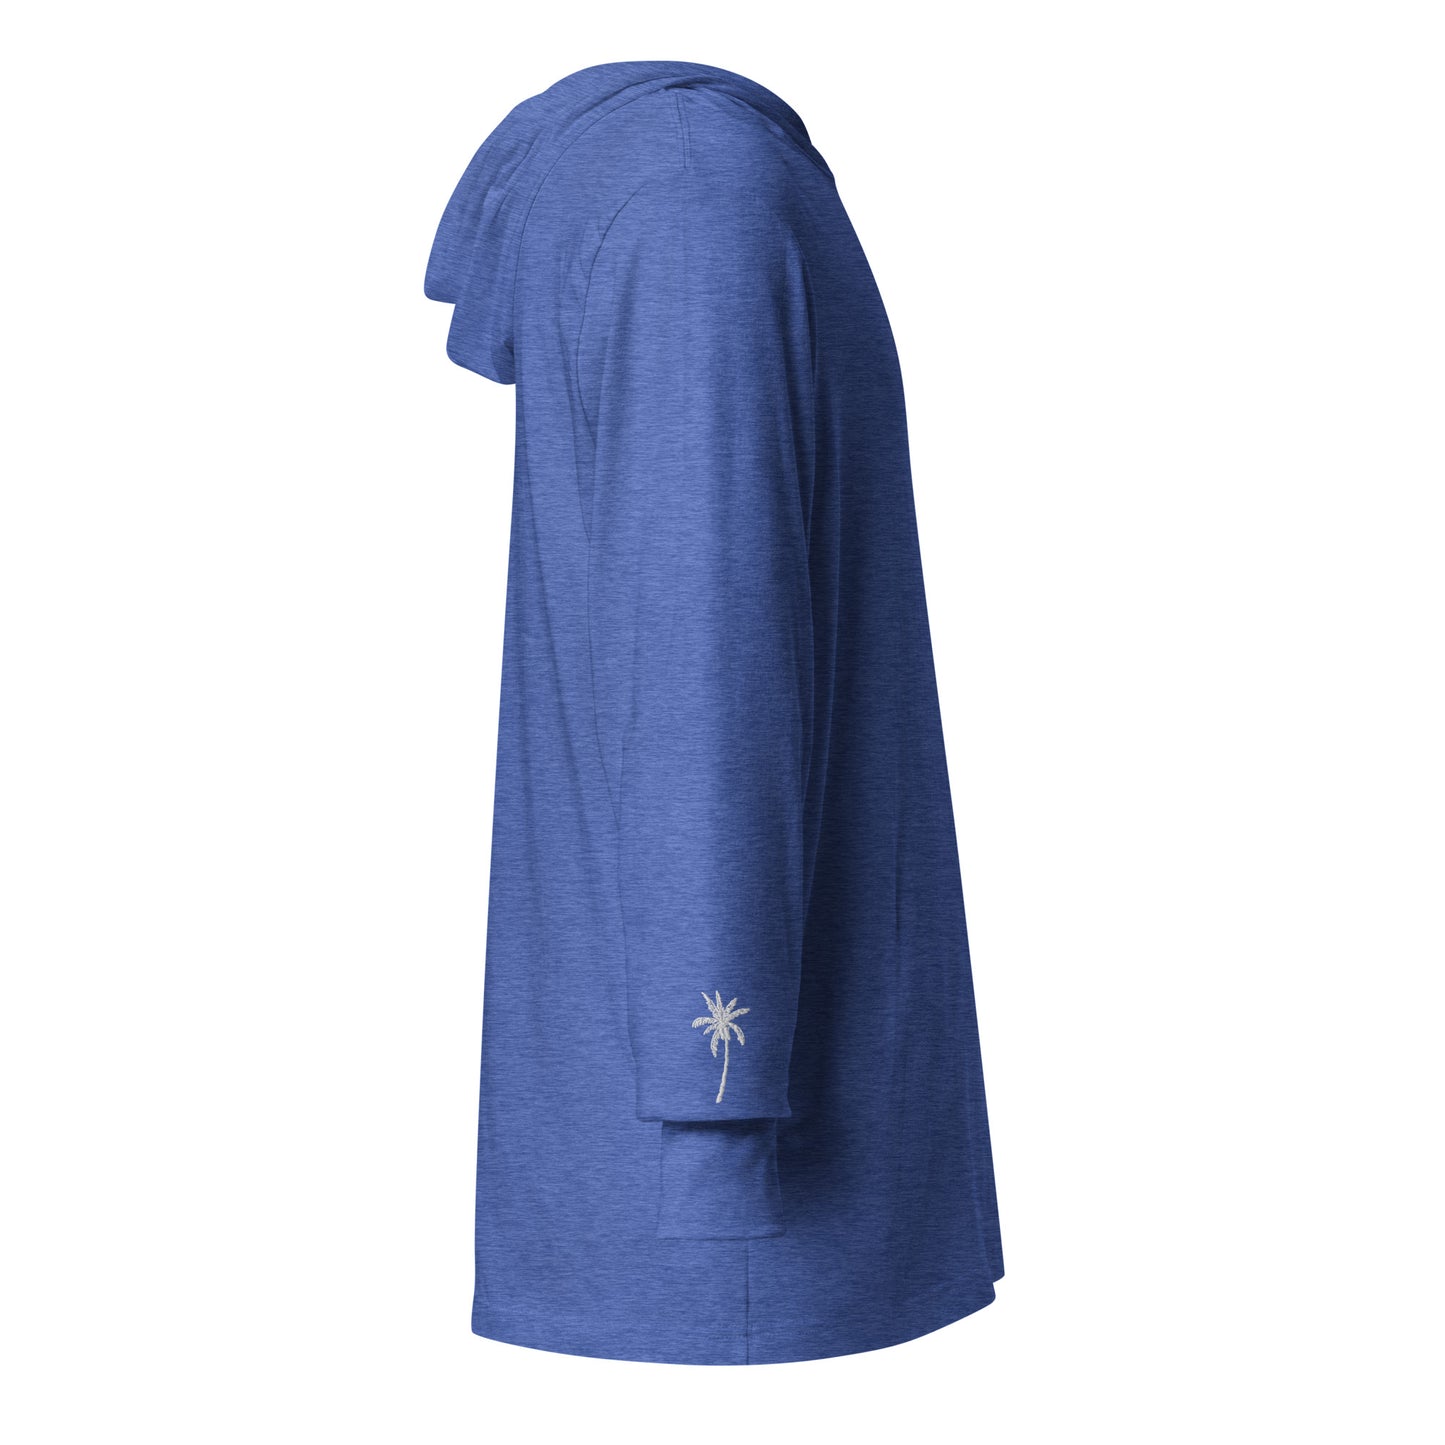 TRBL - Stitched Hooded Tee